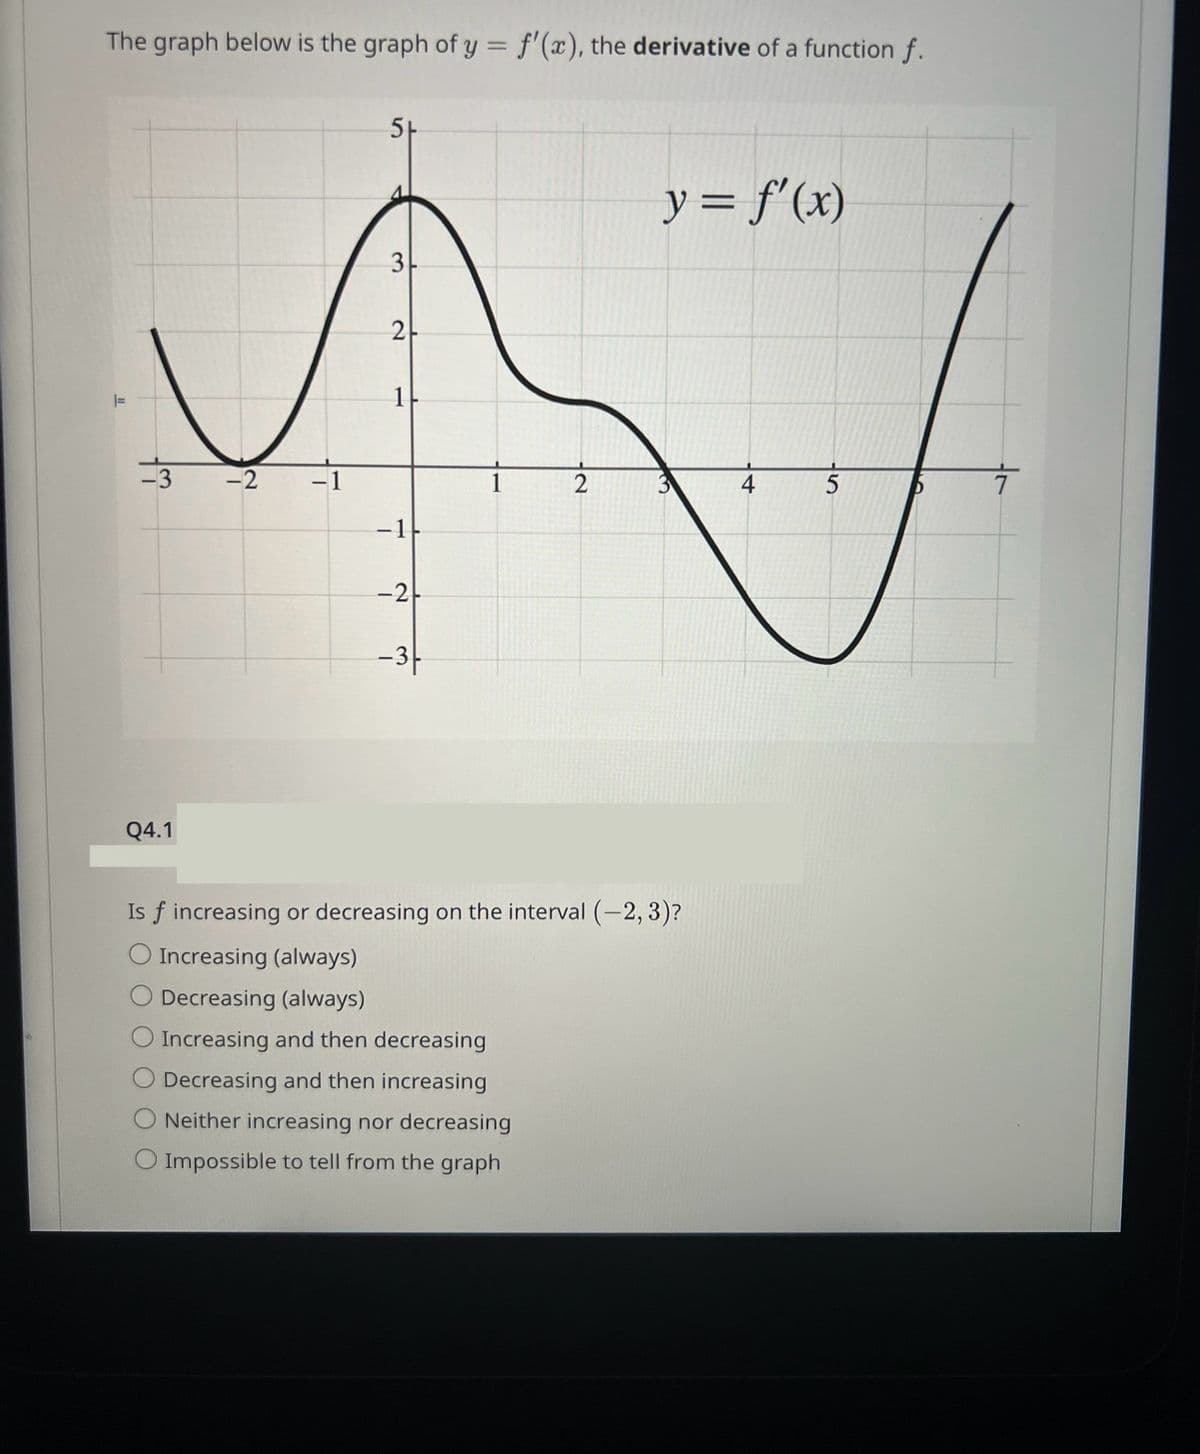 The graph below is the graph of y = f'(x), the derivative of a function f.
y = f'(x)
3-
2
✓
1|
-3 -2 -1
1
2
4
5
- 1
-21
|=
5+
Q4.1
-3-
Is f increasing or decreasing on the interval (-2, 3)?
O Increasing (always)
O Decreasing (always)
O Increasing and then decreasing
O Decreasing and then increasing
Neither increasing nor decreasing
O Impossible to tell from the graph
T